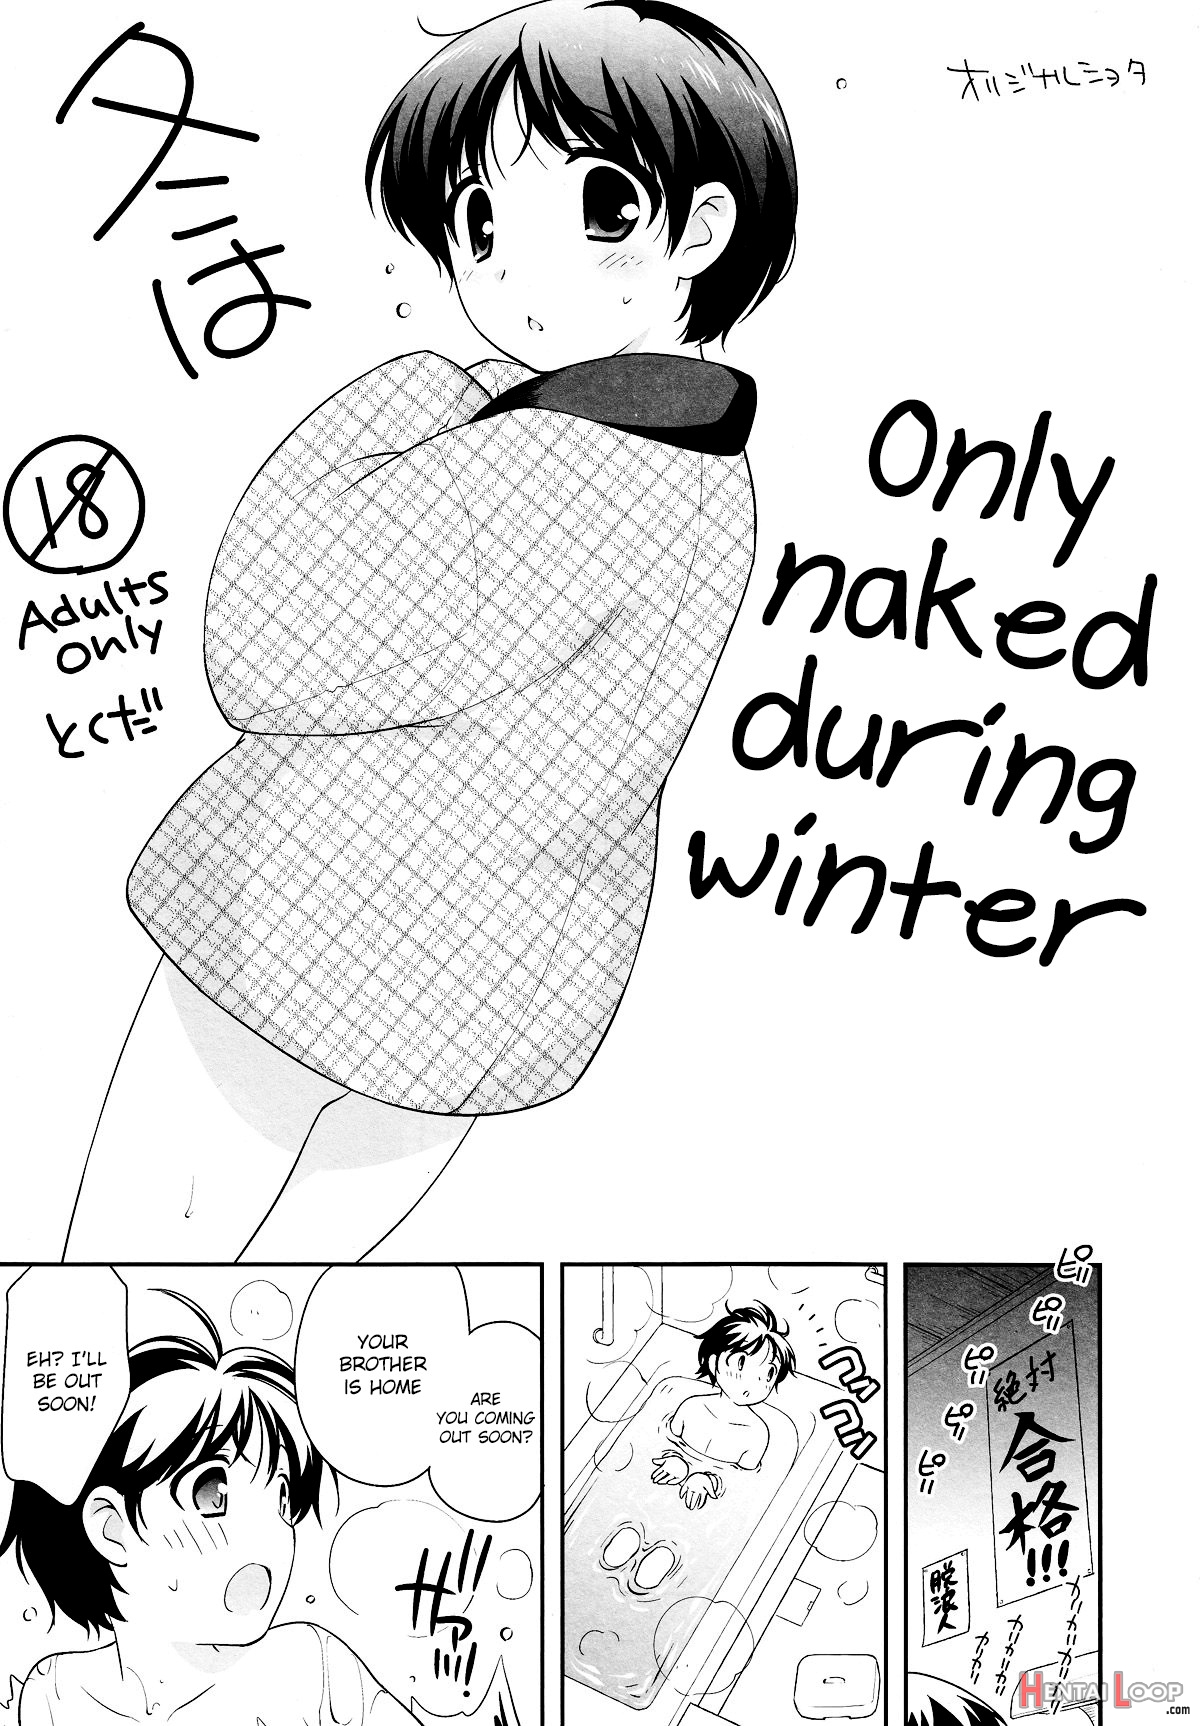 Only Naked During Winter page 1